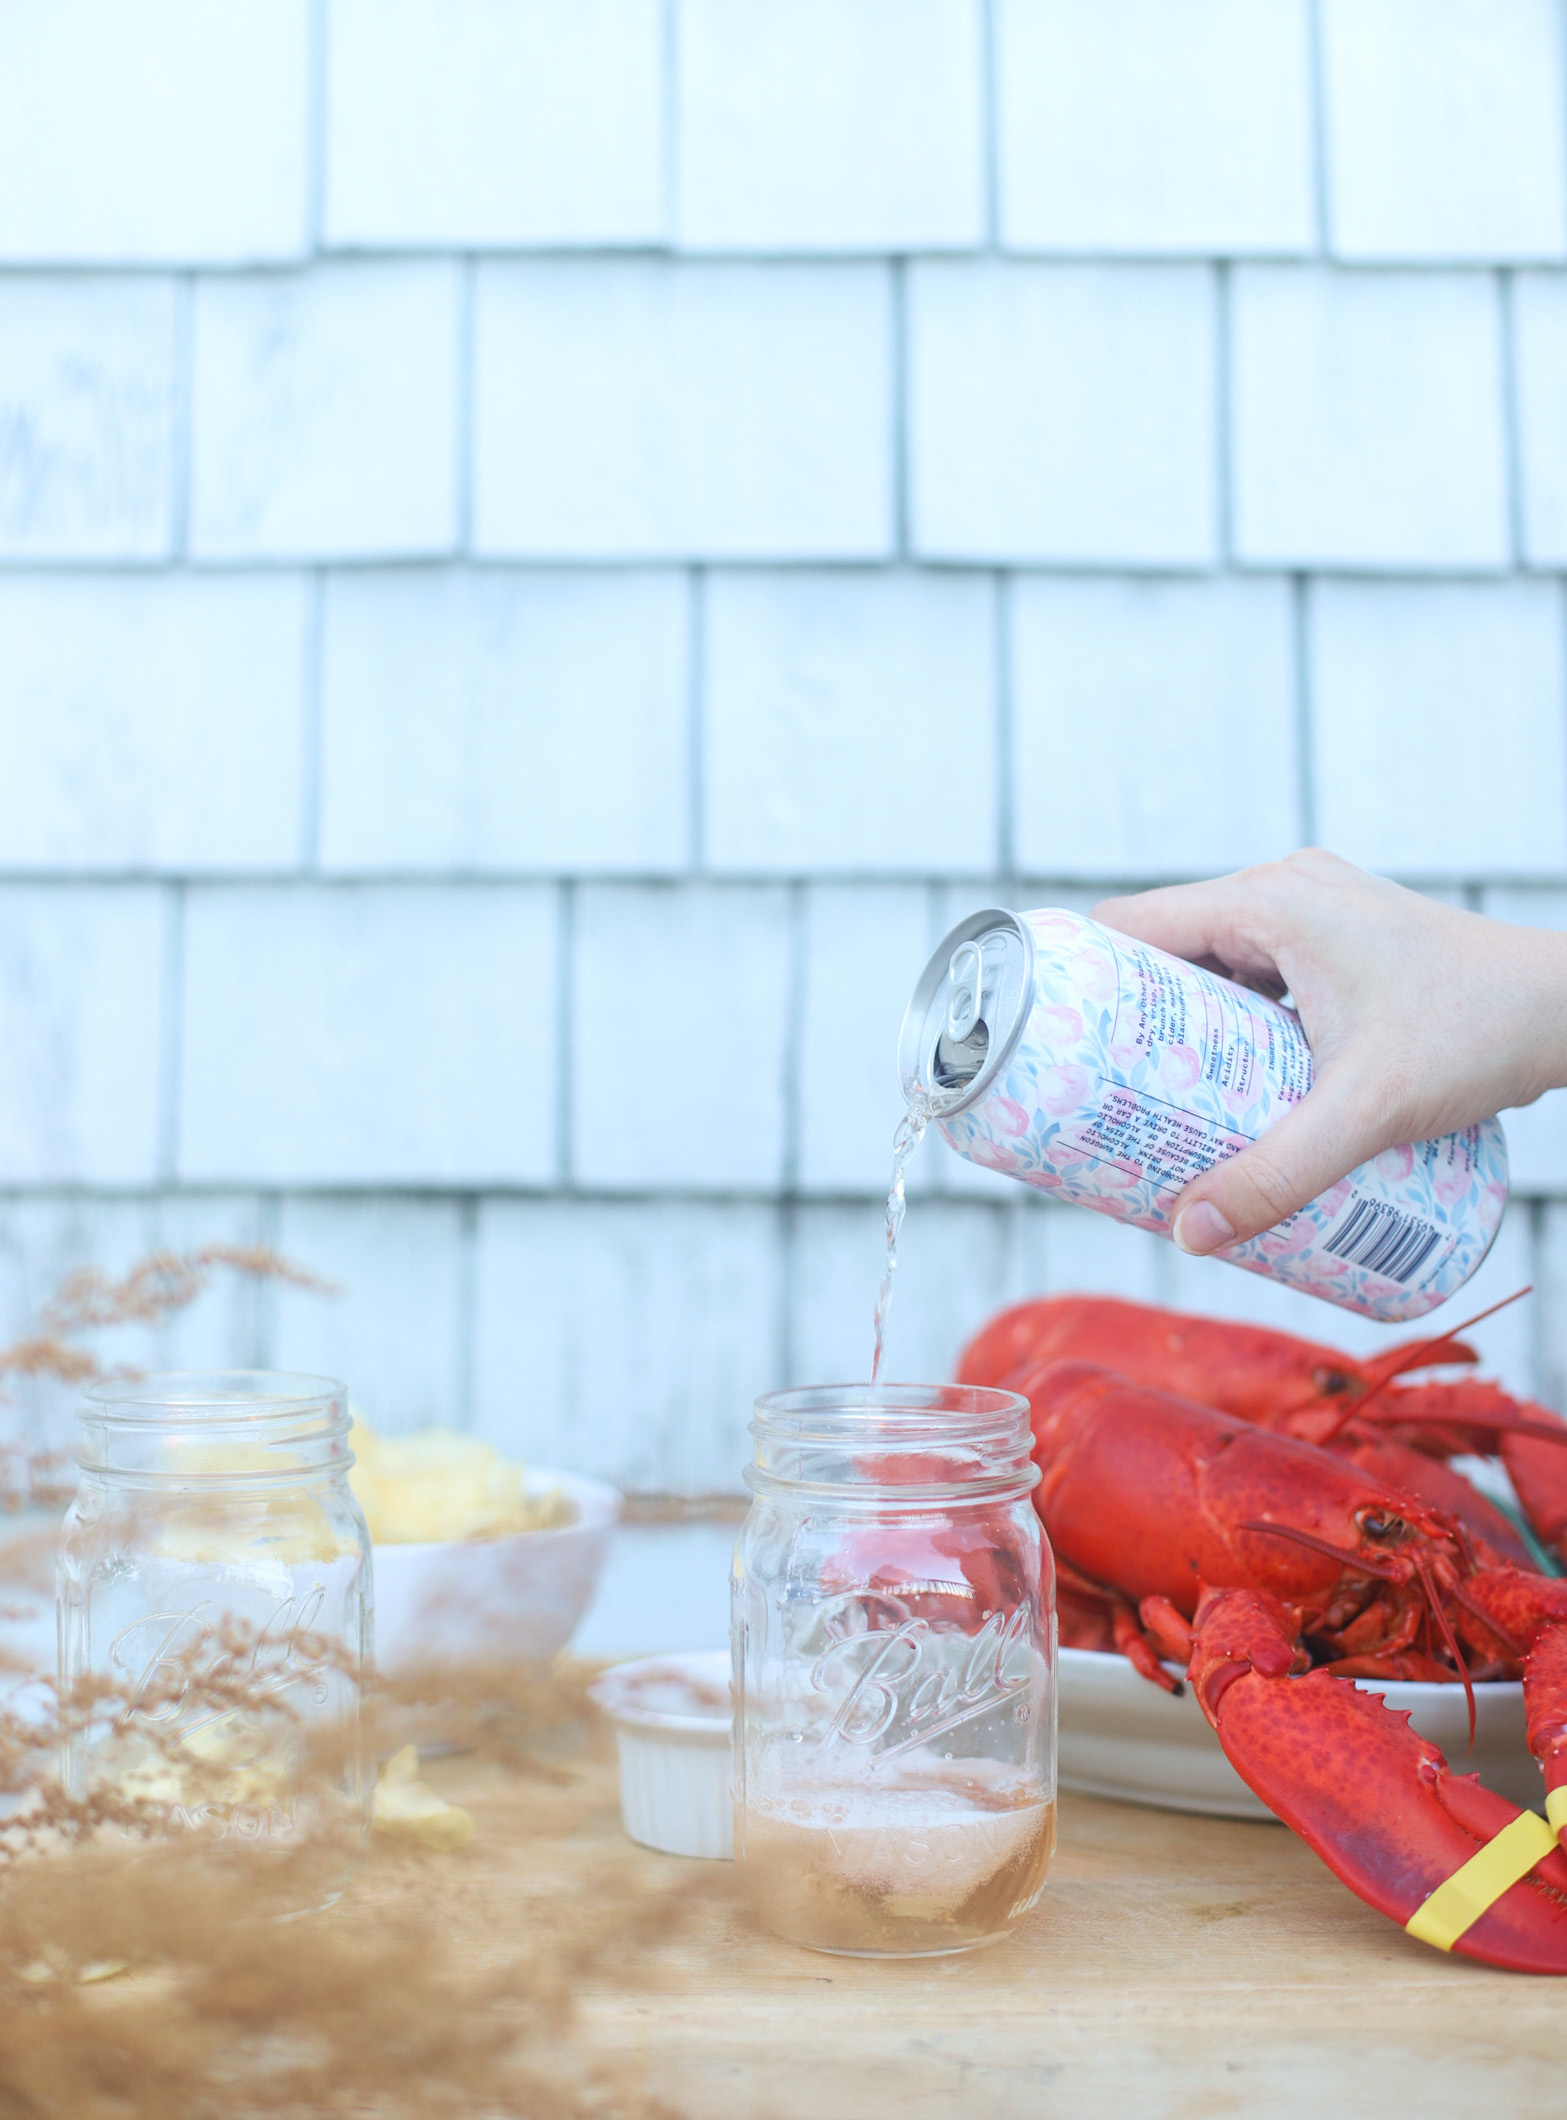 Highlights from our summer trip to Maine, End of Summer Lobster Dinner | @glitterinclexi | GLITTERINC.COM